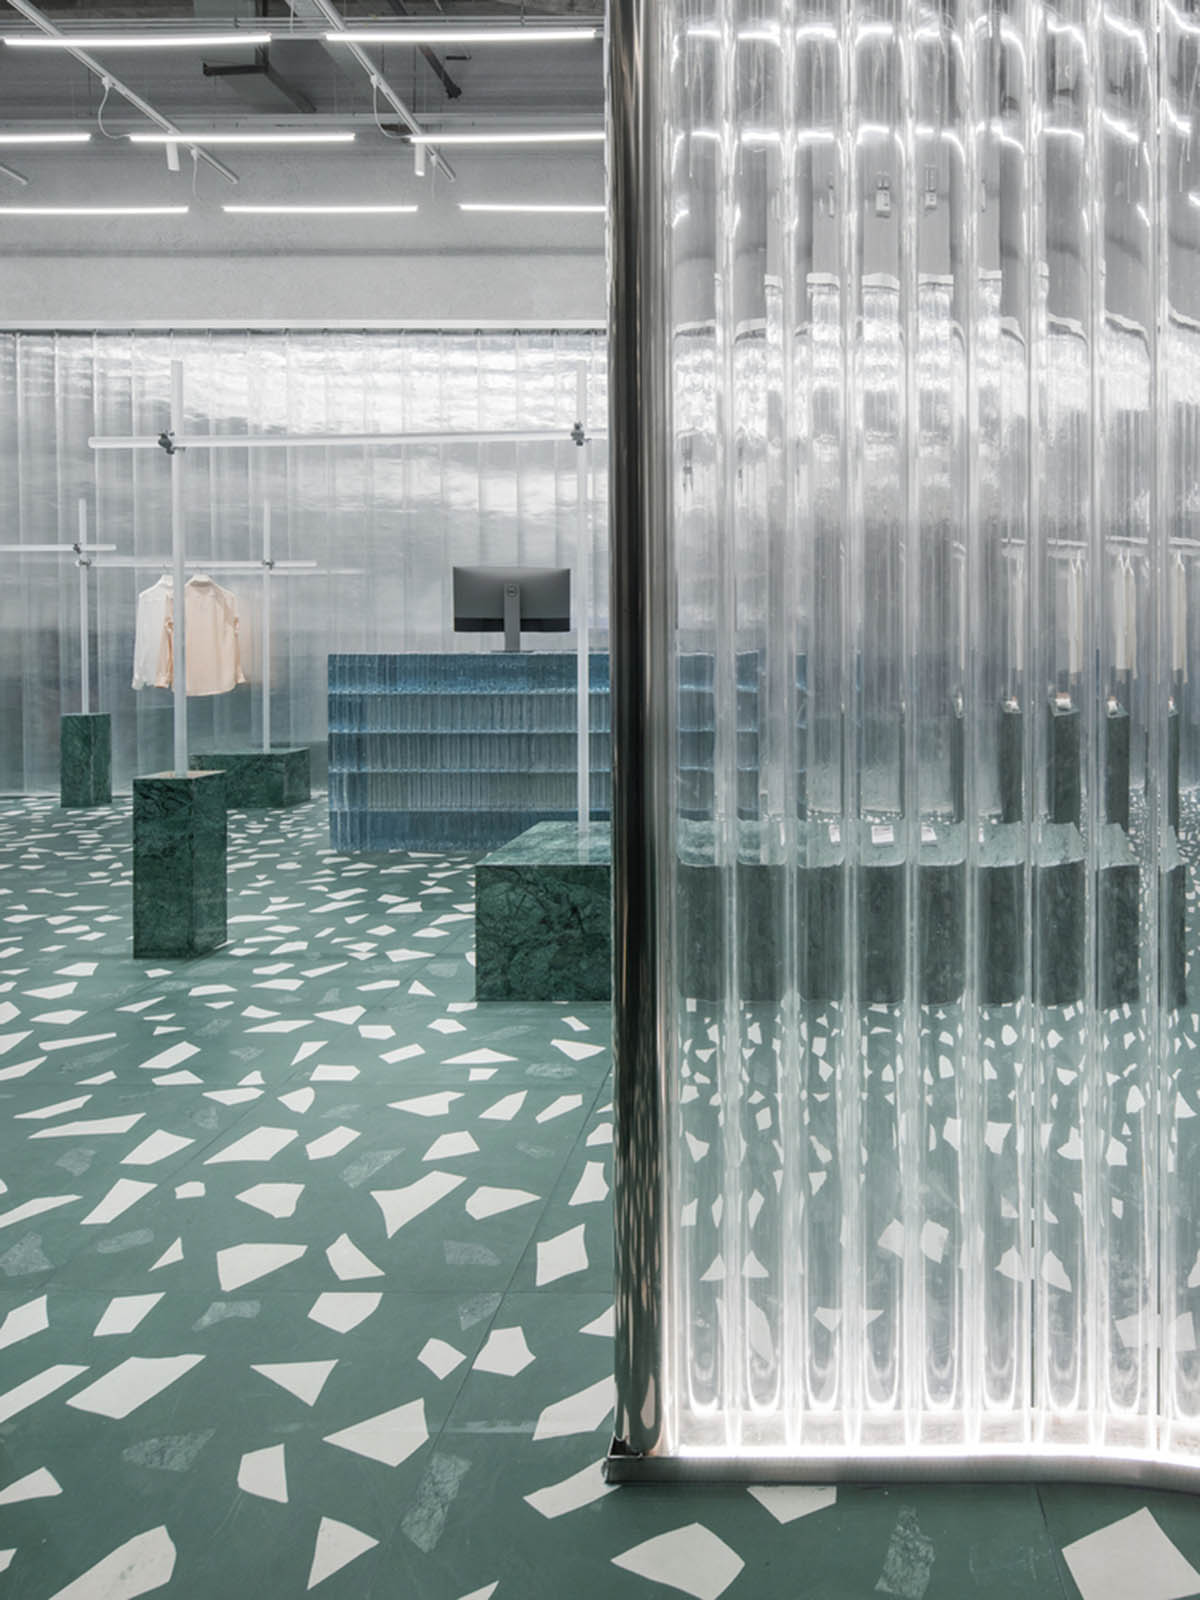 Studio 10 designs fashion store combining different hues of green color ...